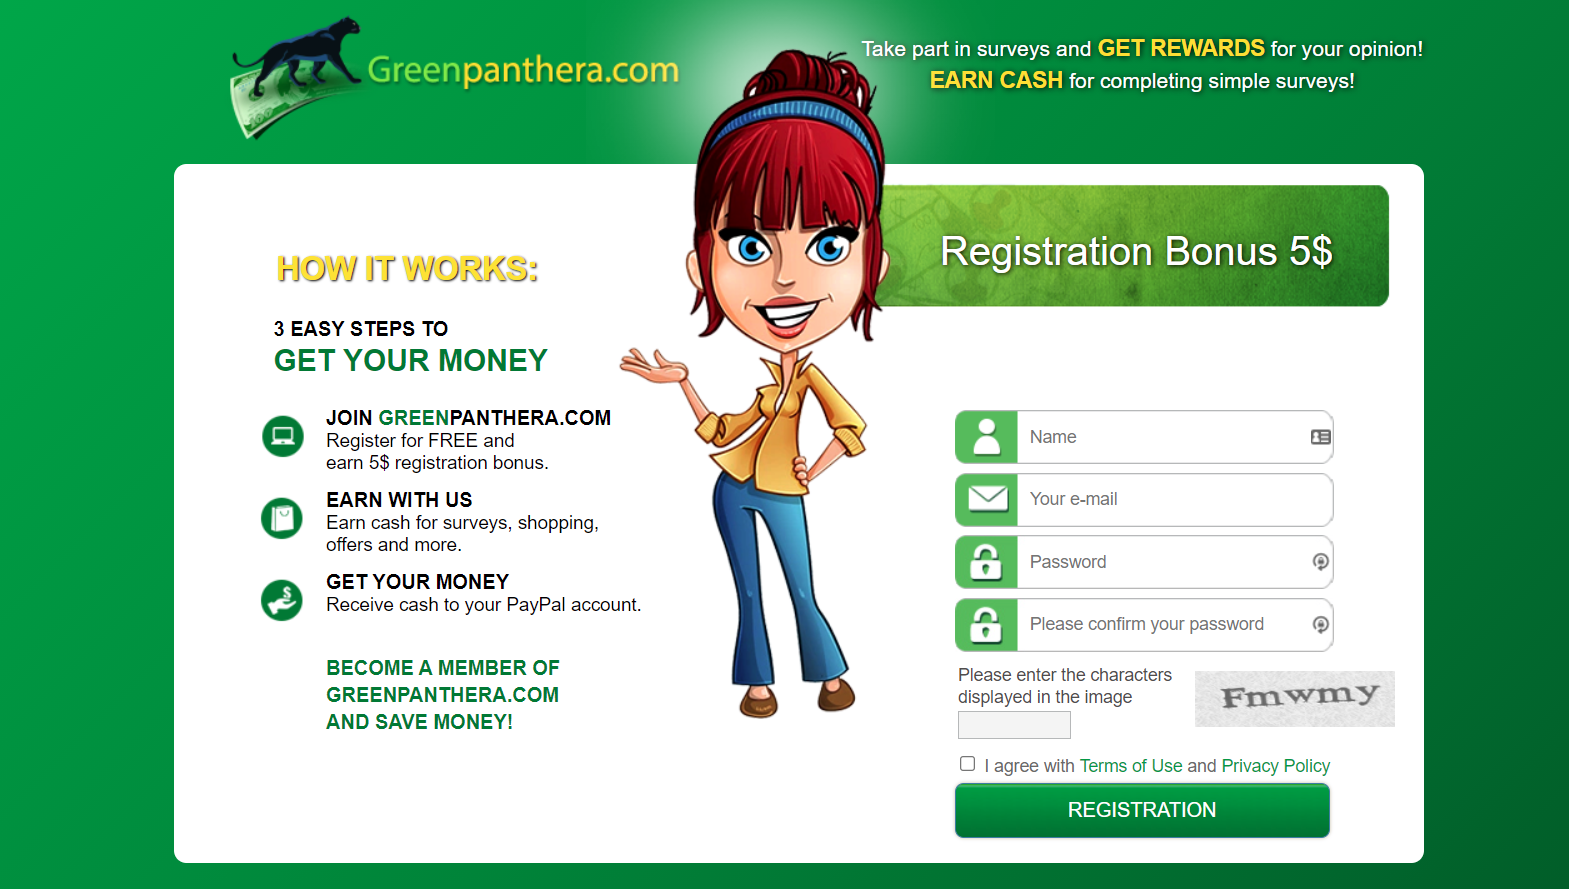 The sign up form of Green Panthera